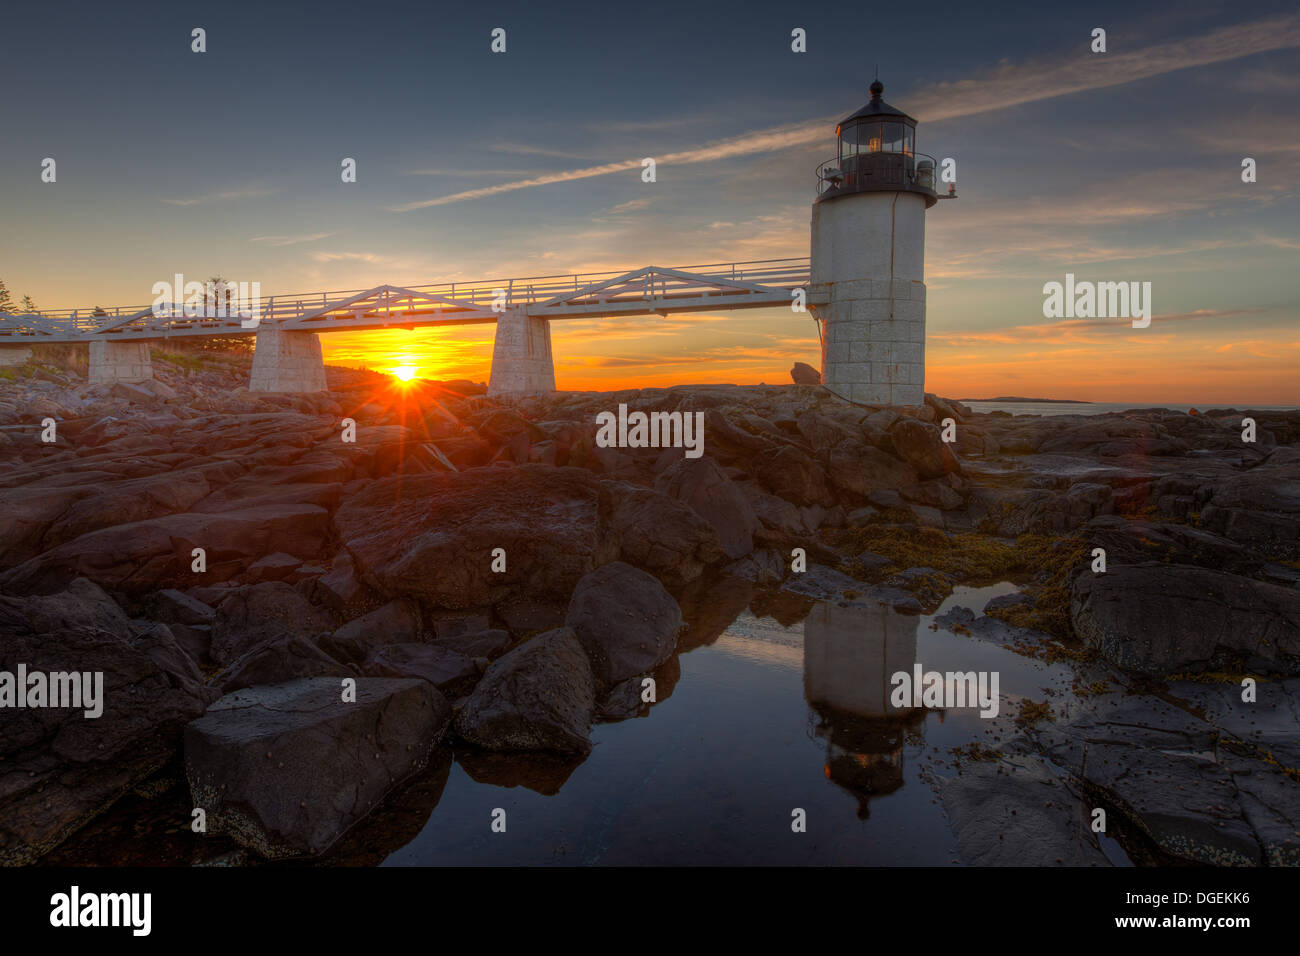 Marshall Point Lighthouse and its reflection in a tidal pool at sunrise in Port Clyde, Maine. Stock Photo